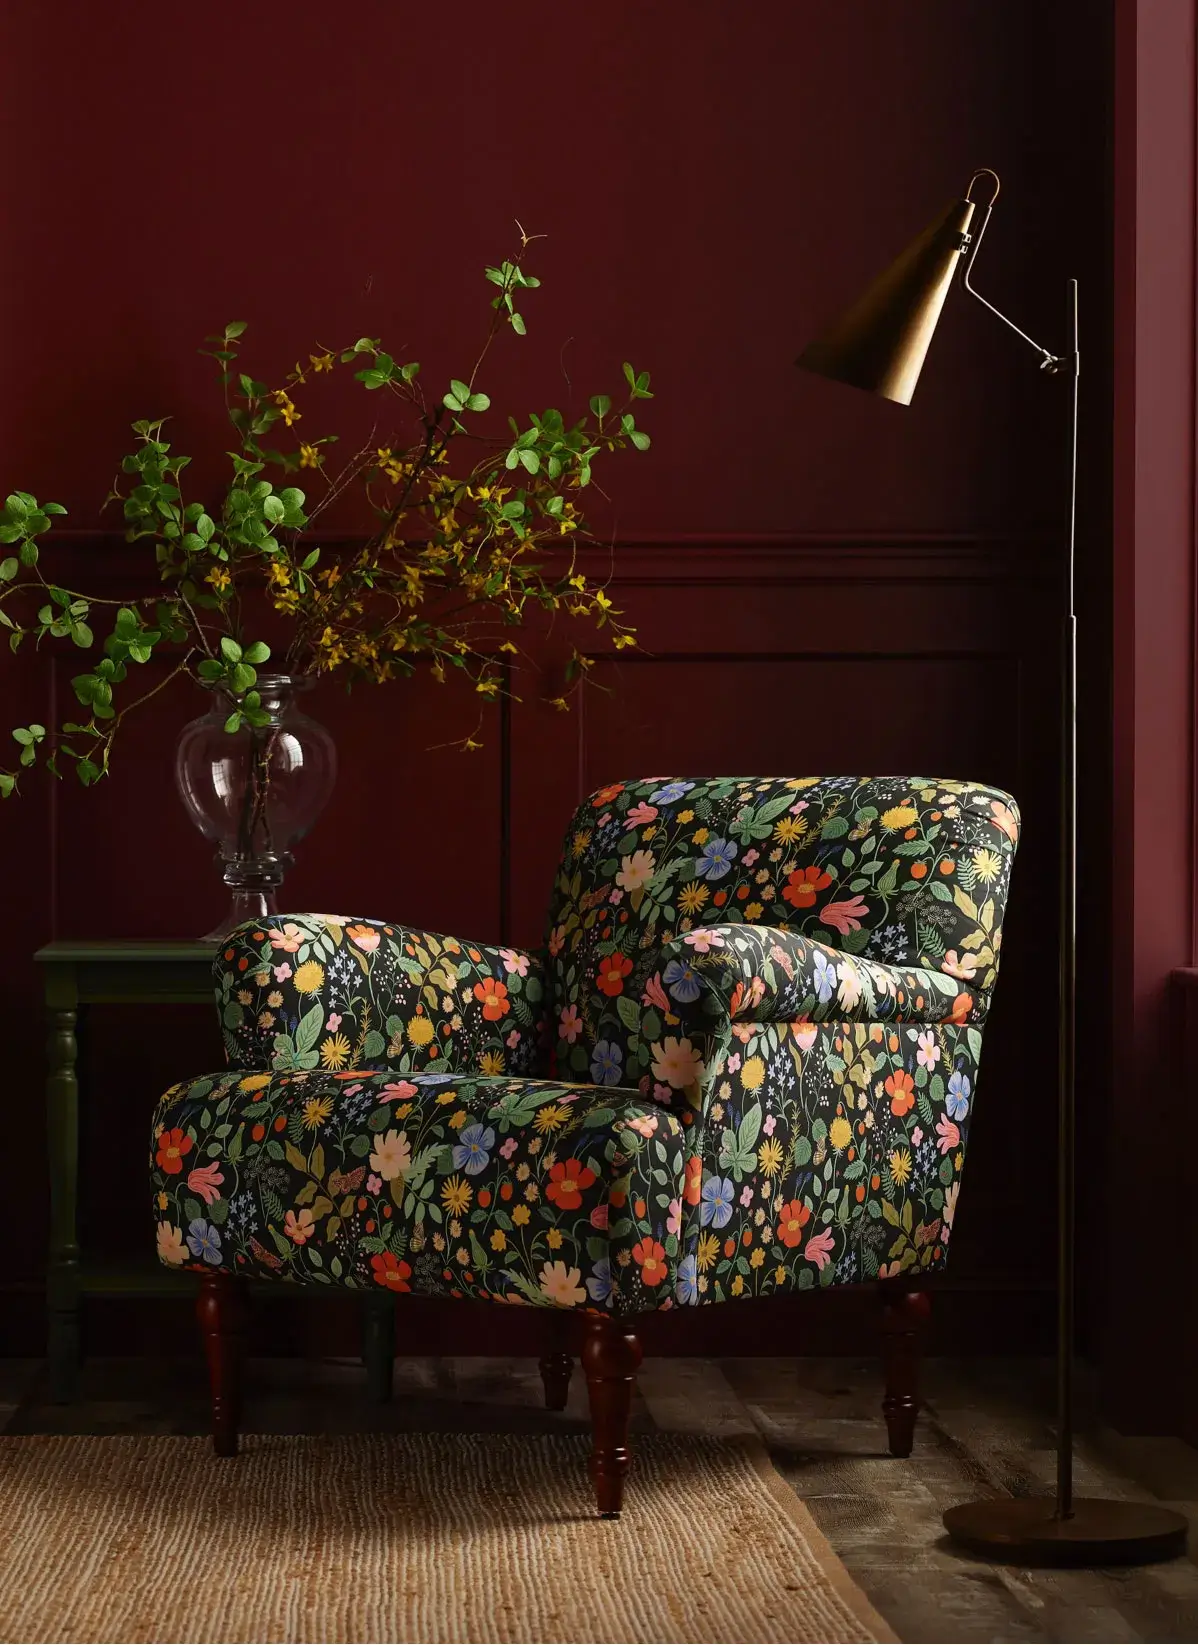 Rifle Paper Co. Have Launched Their First Furniture Collection